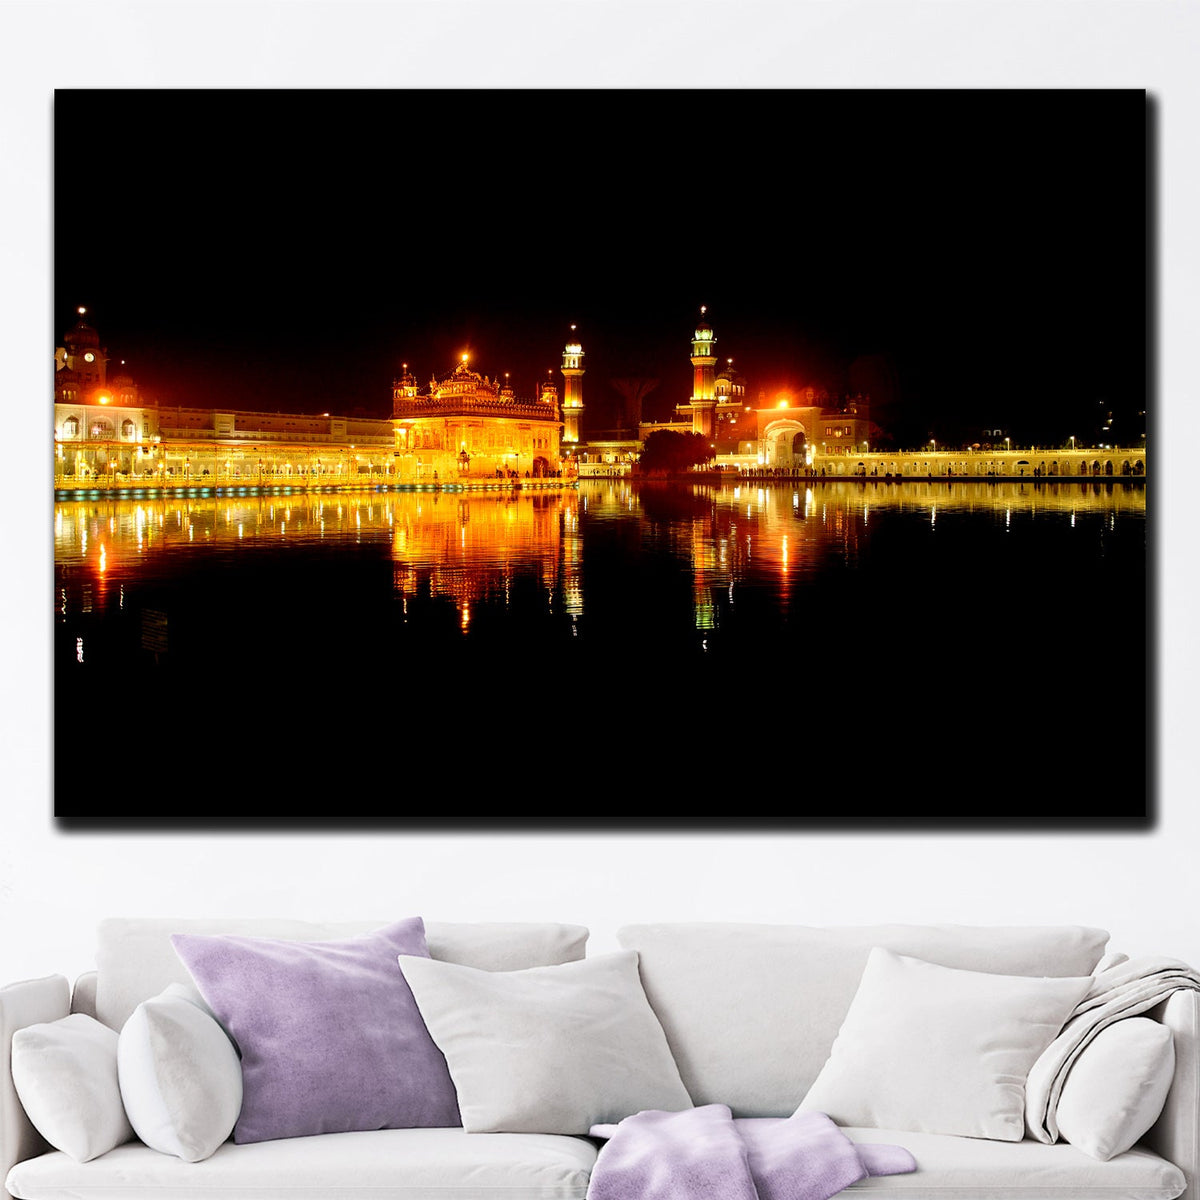 https://cdn.shopify.com/s/files/1/0387/9986/8044/products/TheIconicGoldenTempleCanvasArtprintStretched-1.jpg